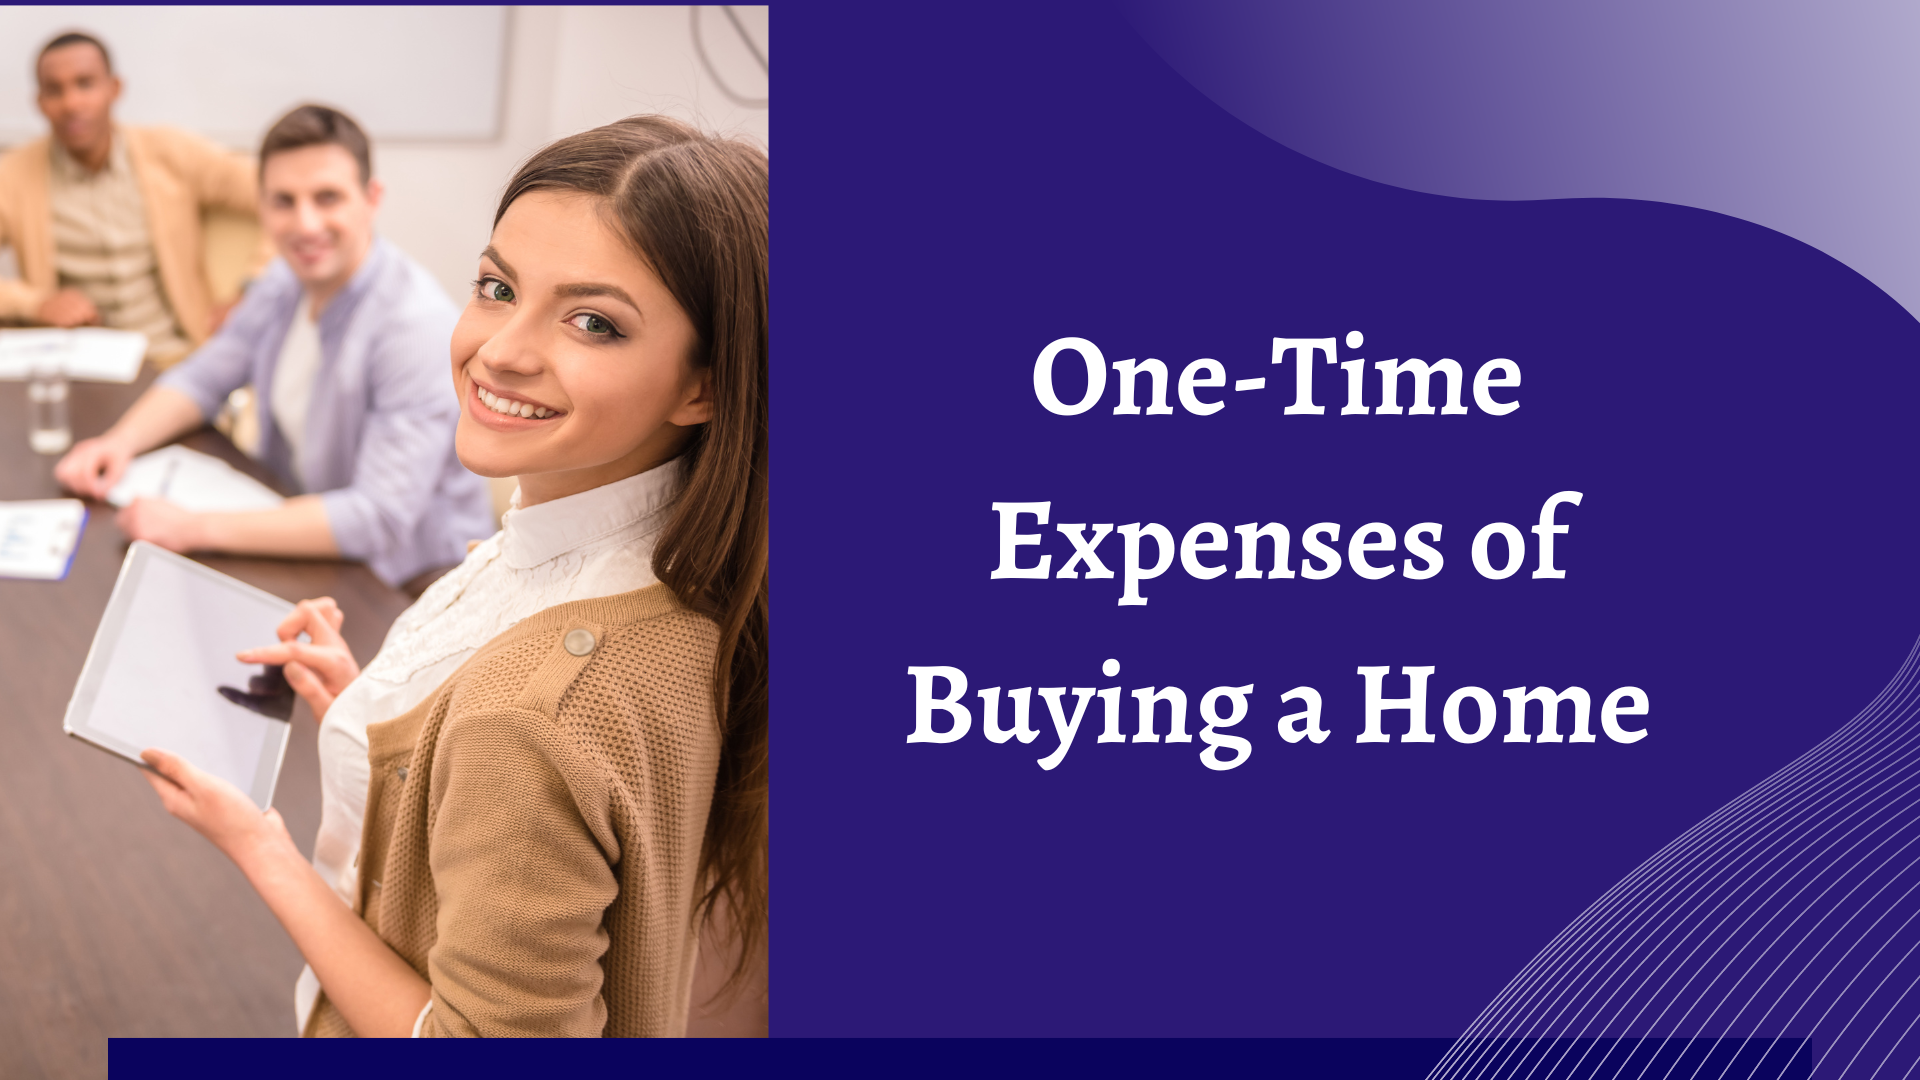 One-Time Expenses of Buying a Home